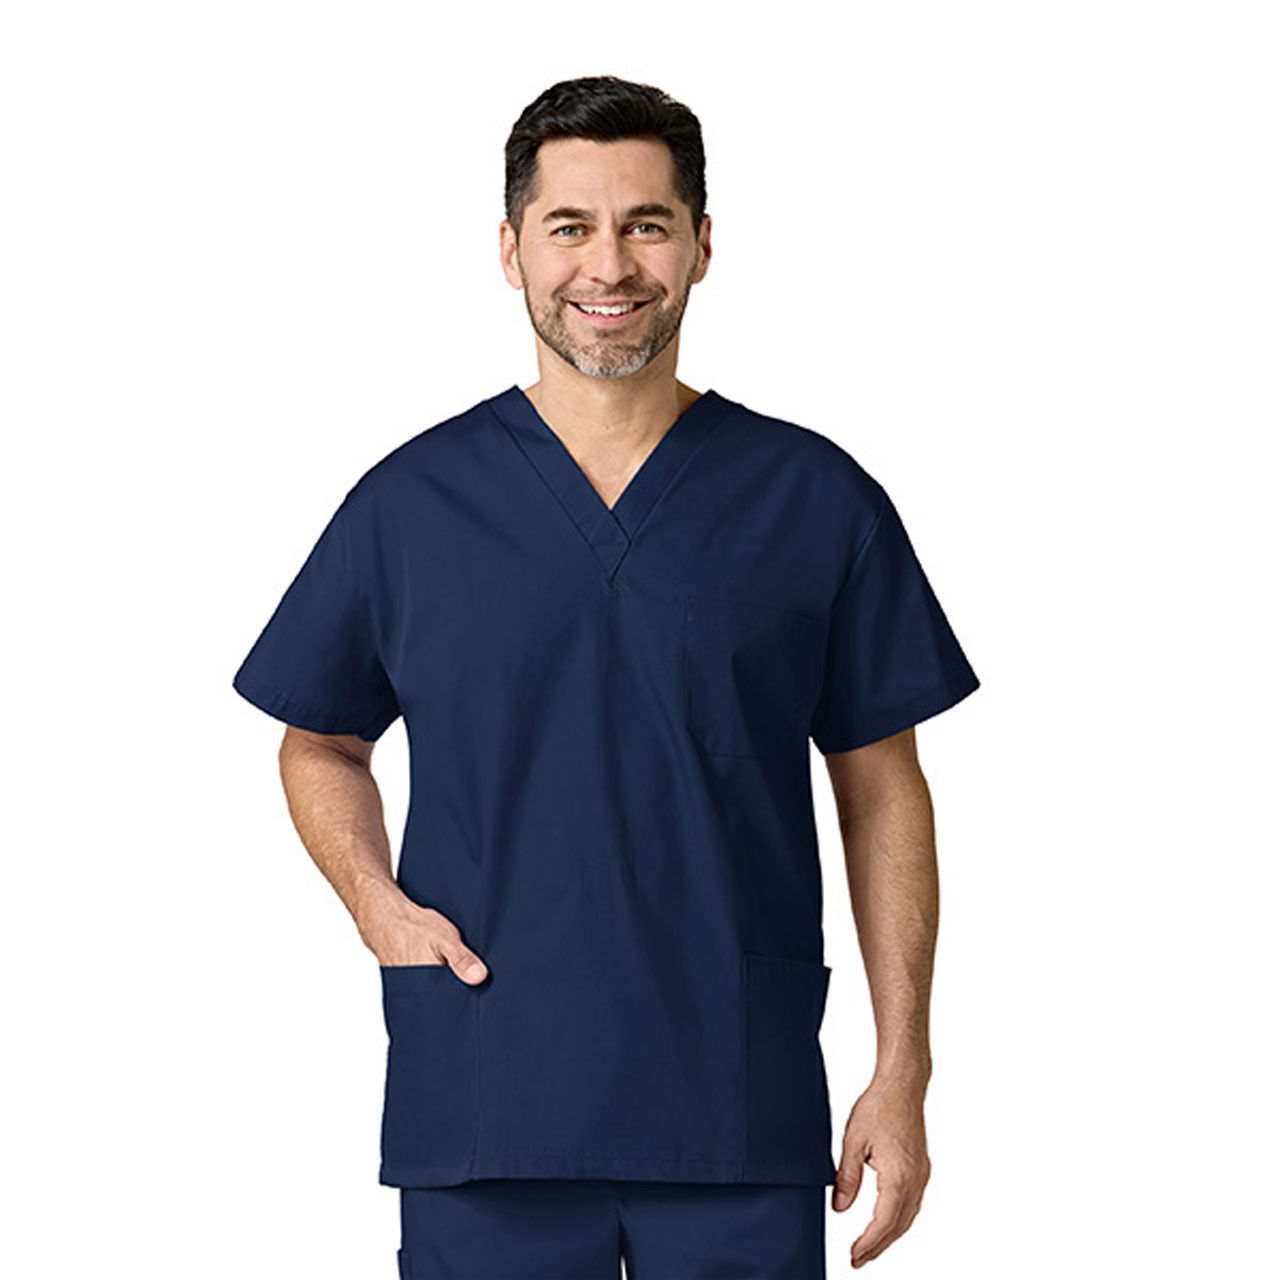 What is the design of the Navy Blue Scrub Tops?